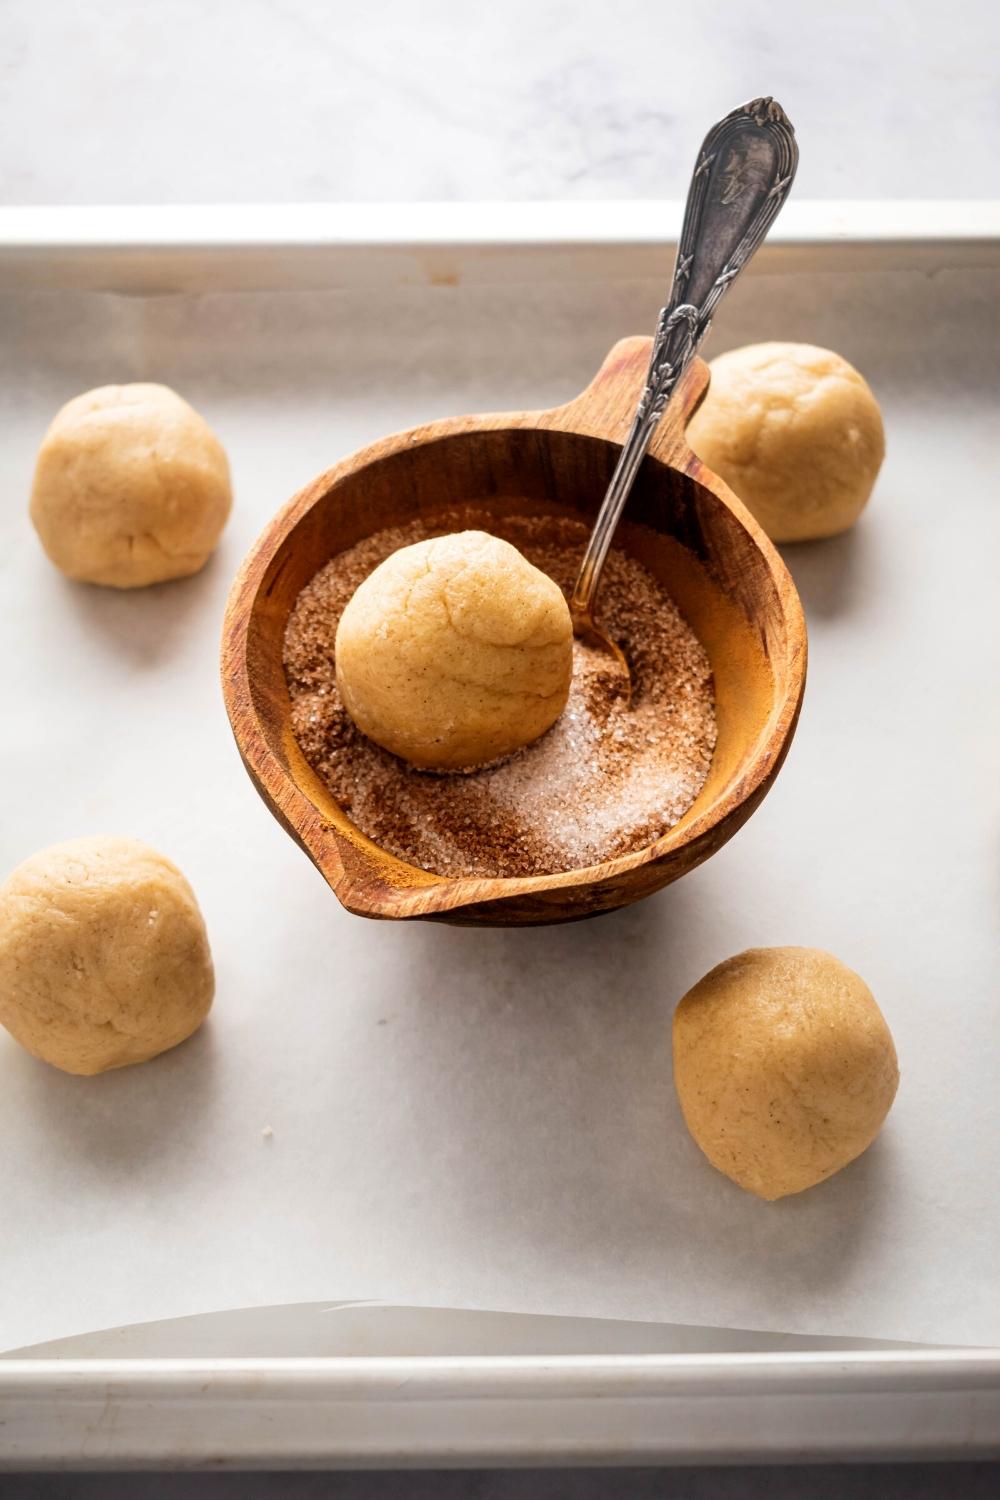 A snickerdoodle cookie dough ball in a ball that is filled with cinnamon and sugar. The ball is on top of a piece of parchment paper that has four snickerdoodles on it surrounding the bowl.